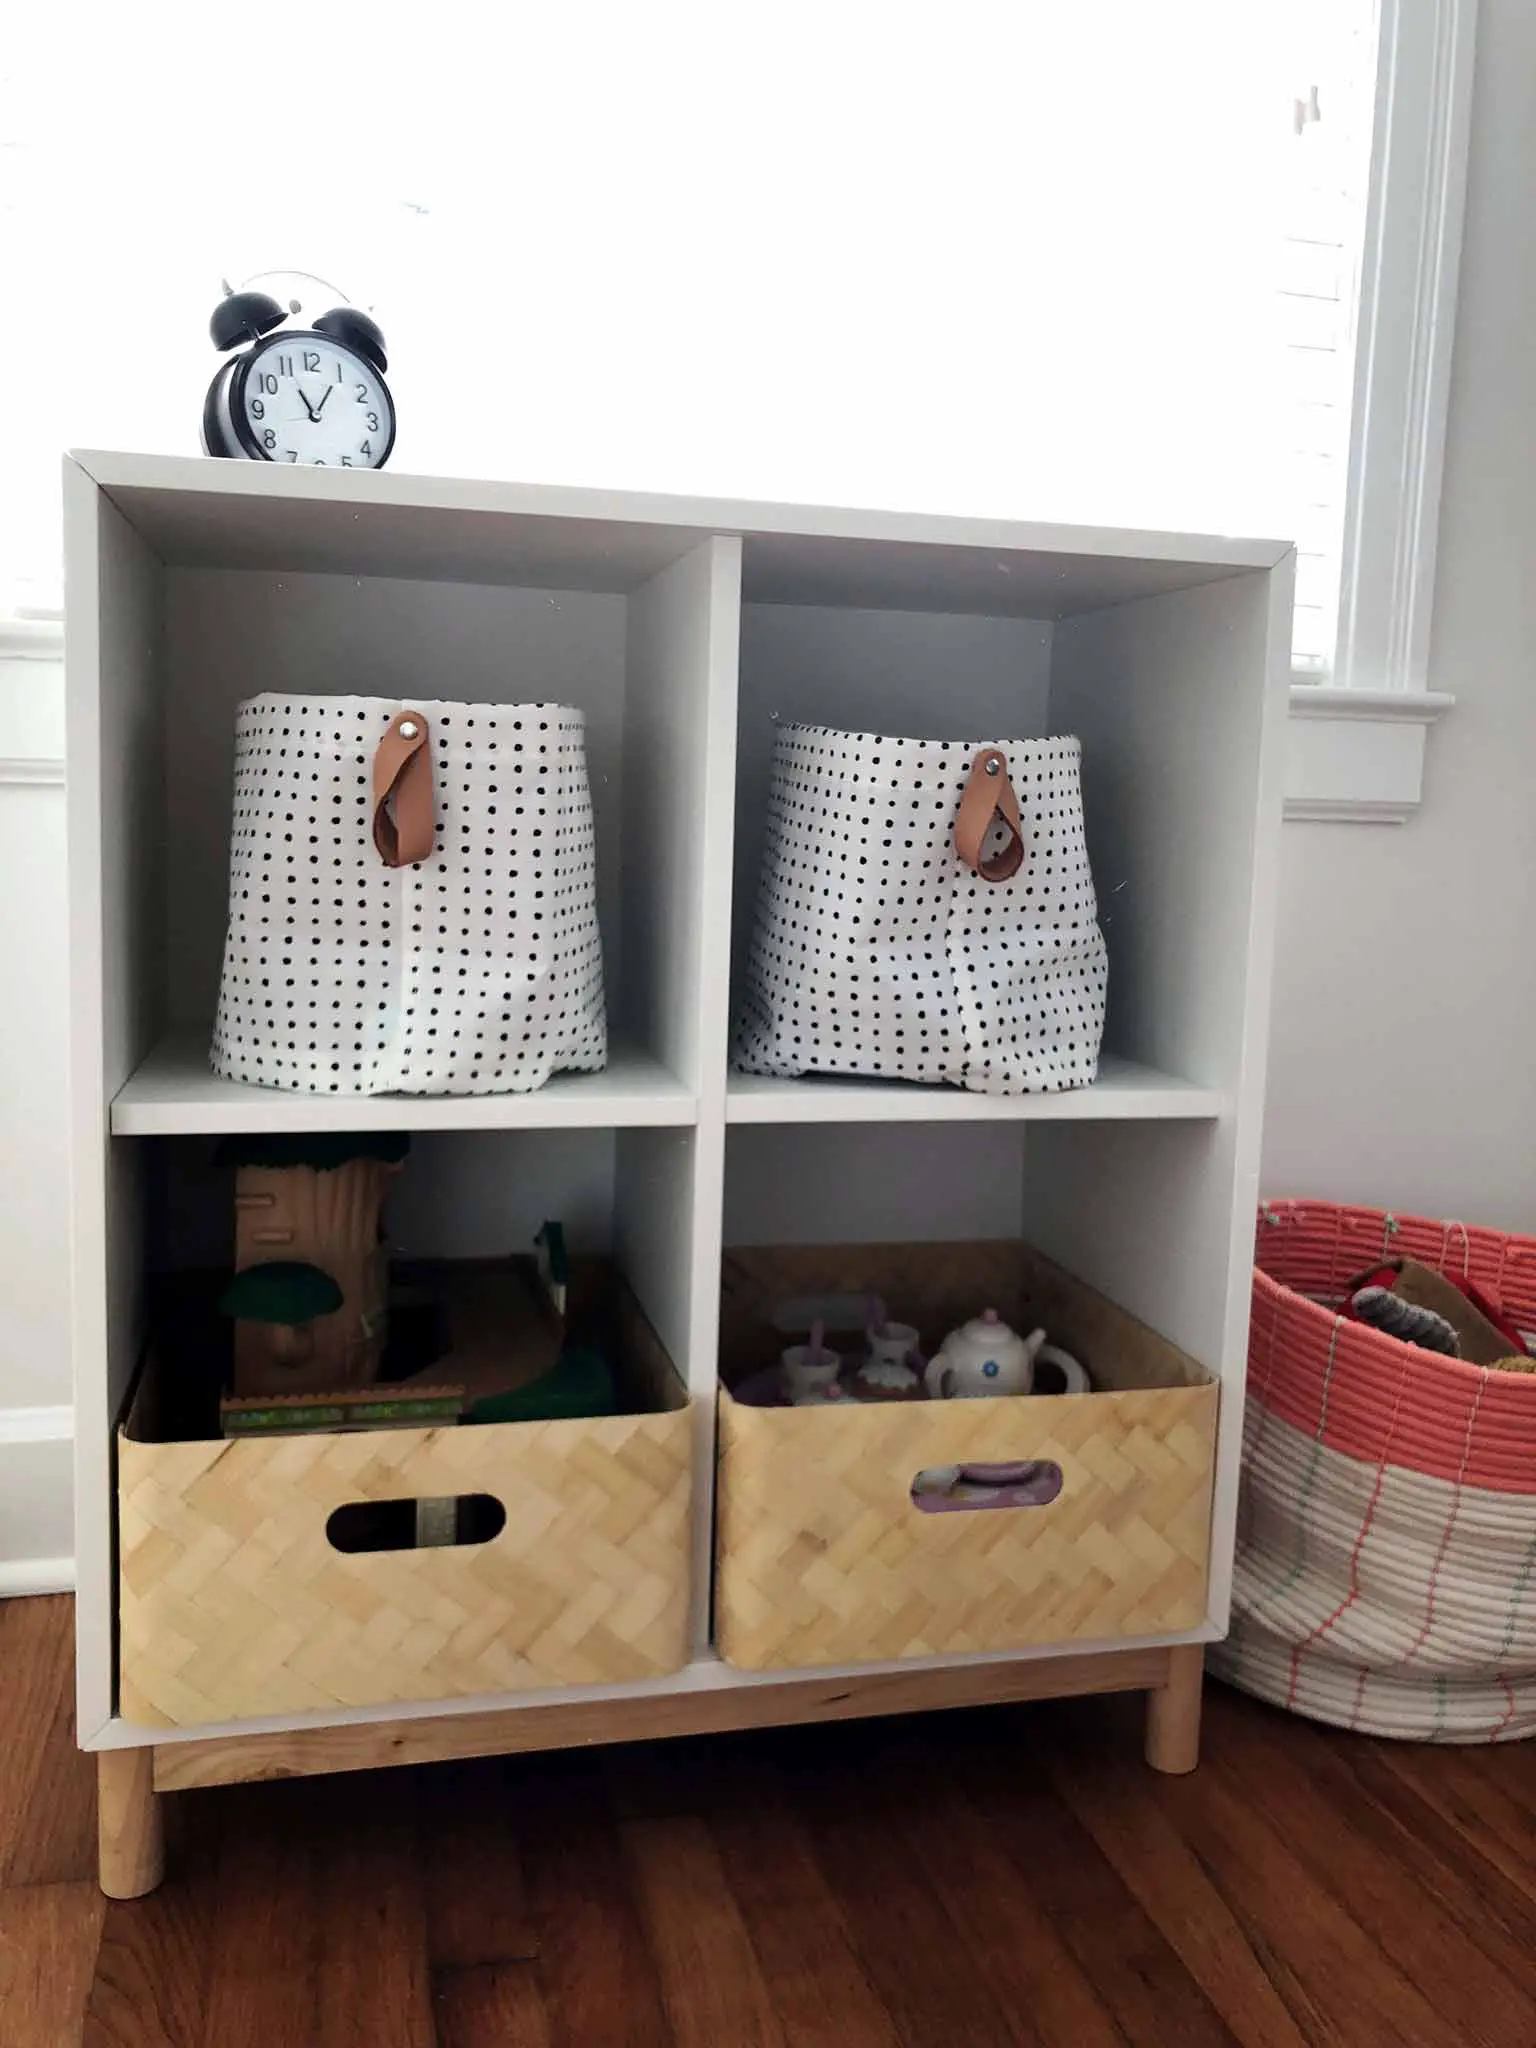 EKET Storage Cubbies - Guest Participant of the One Room Challenge - That Homebird Life Blog